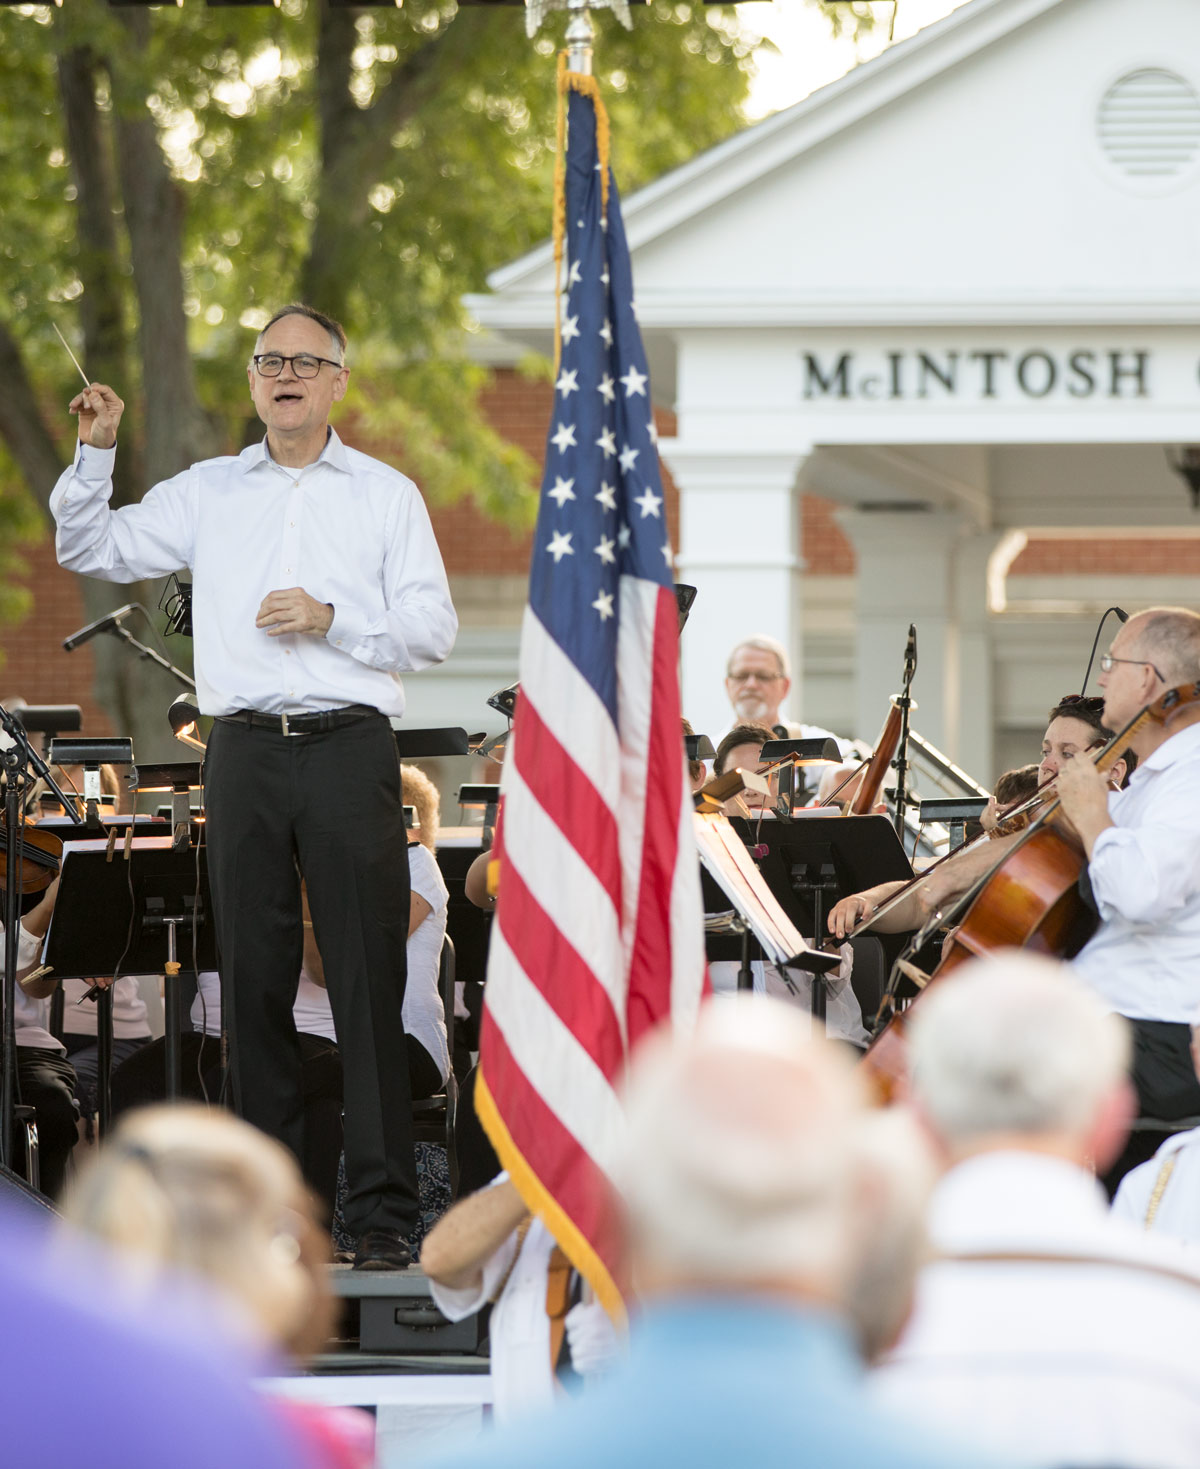 The Lima Symphony Orchestra played a 鈥淧atriotic Pops鈥� concert outside of McIntosh Center on the campus of Ohio Northern University. 